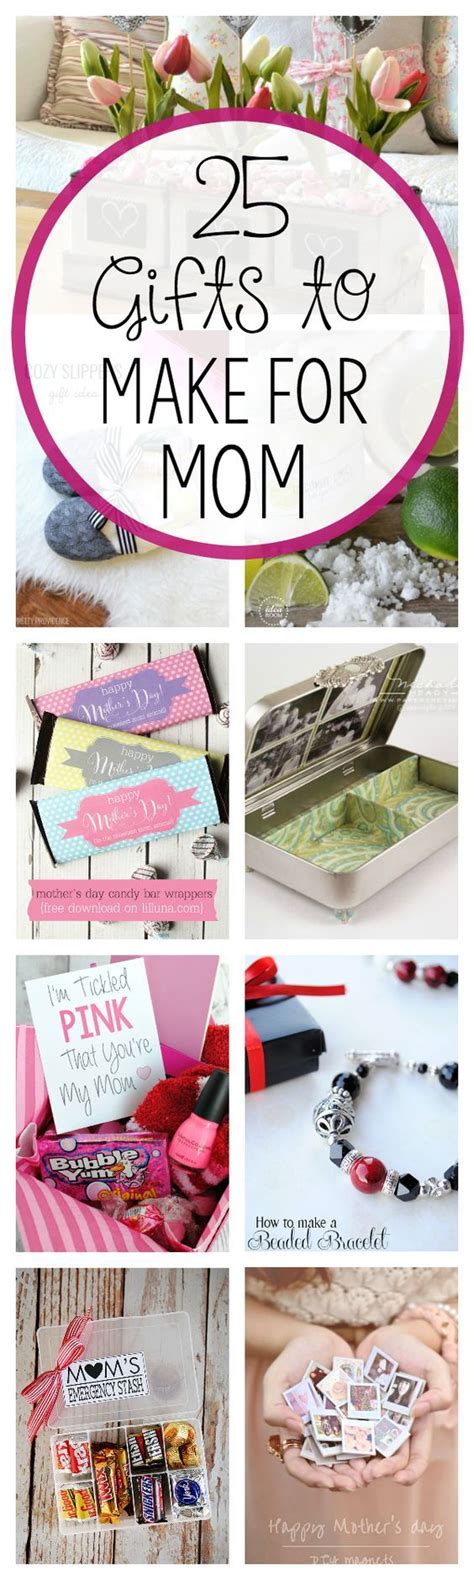 Best gifts for mom birthday diy. Homemade Mother's Day Gifts | Birthday presents for mom ...